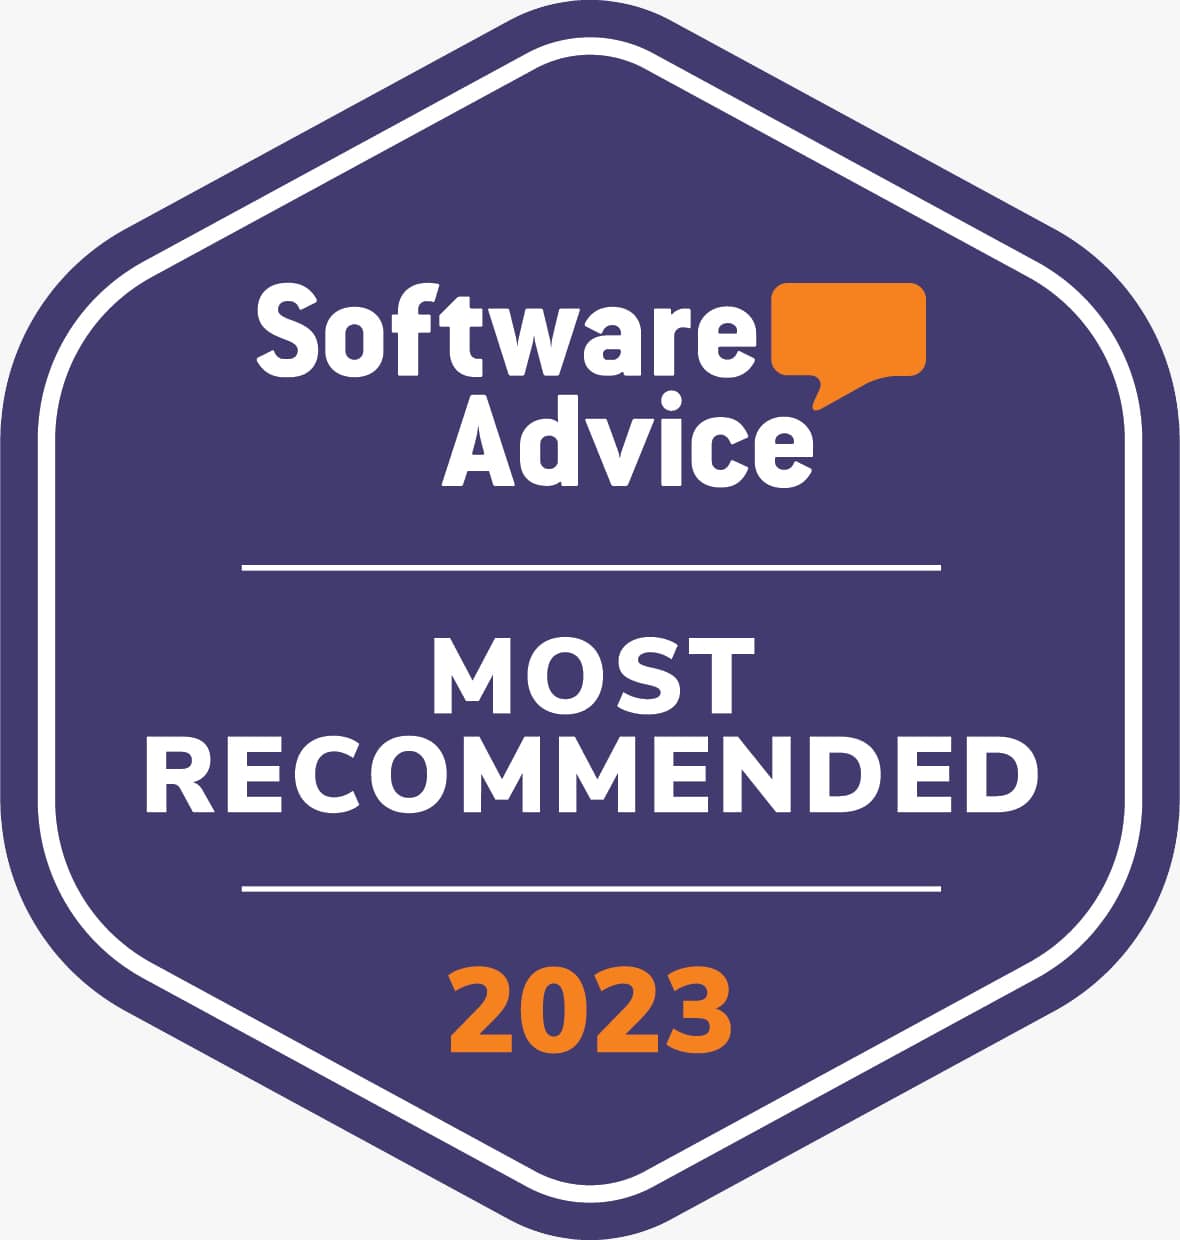 Most Recommended software provider